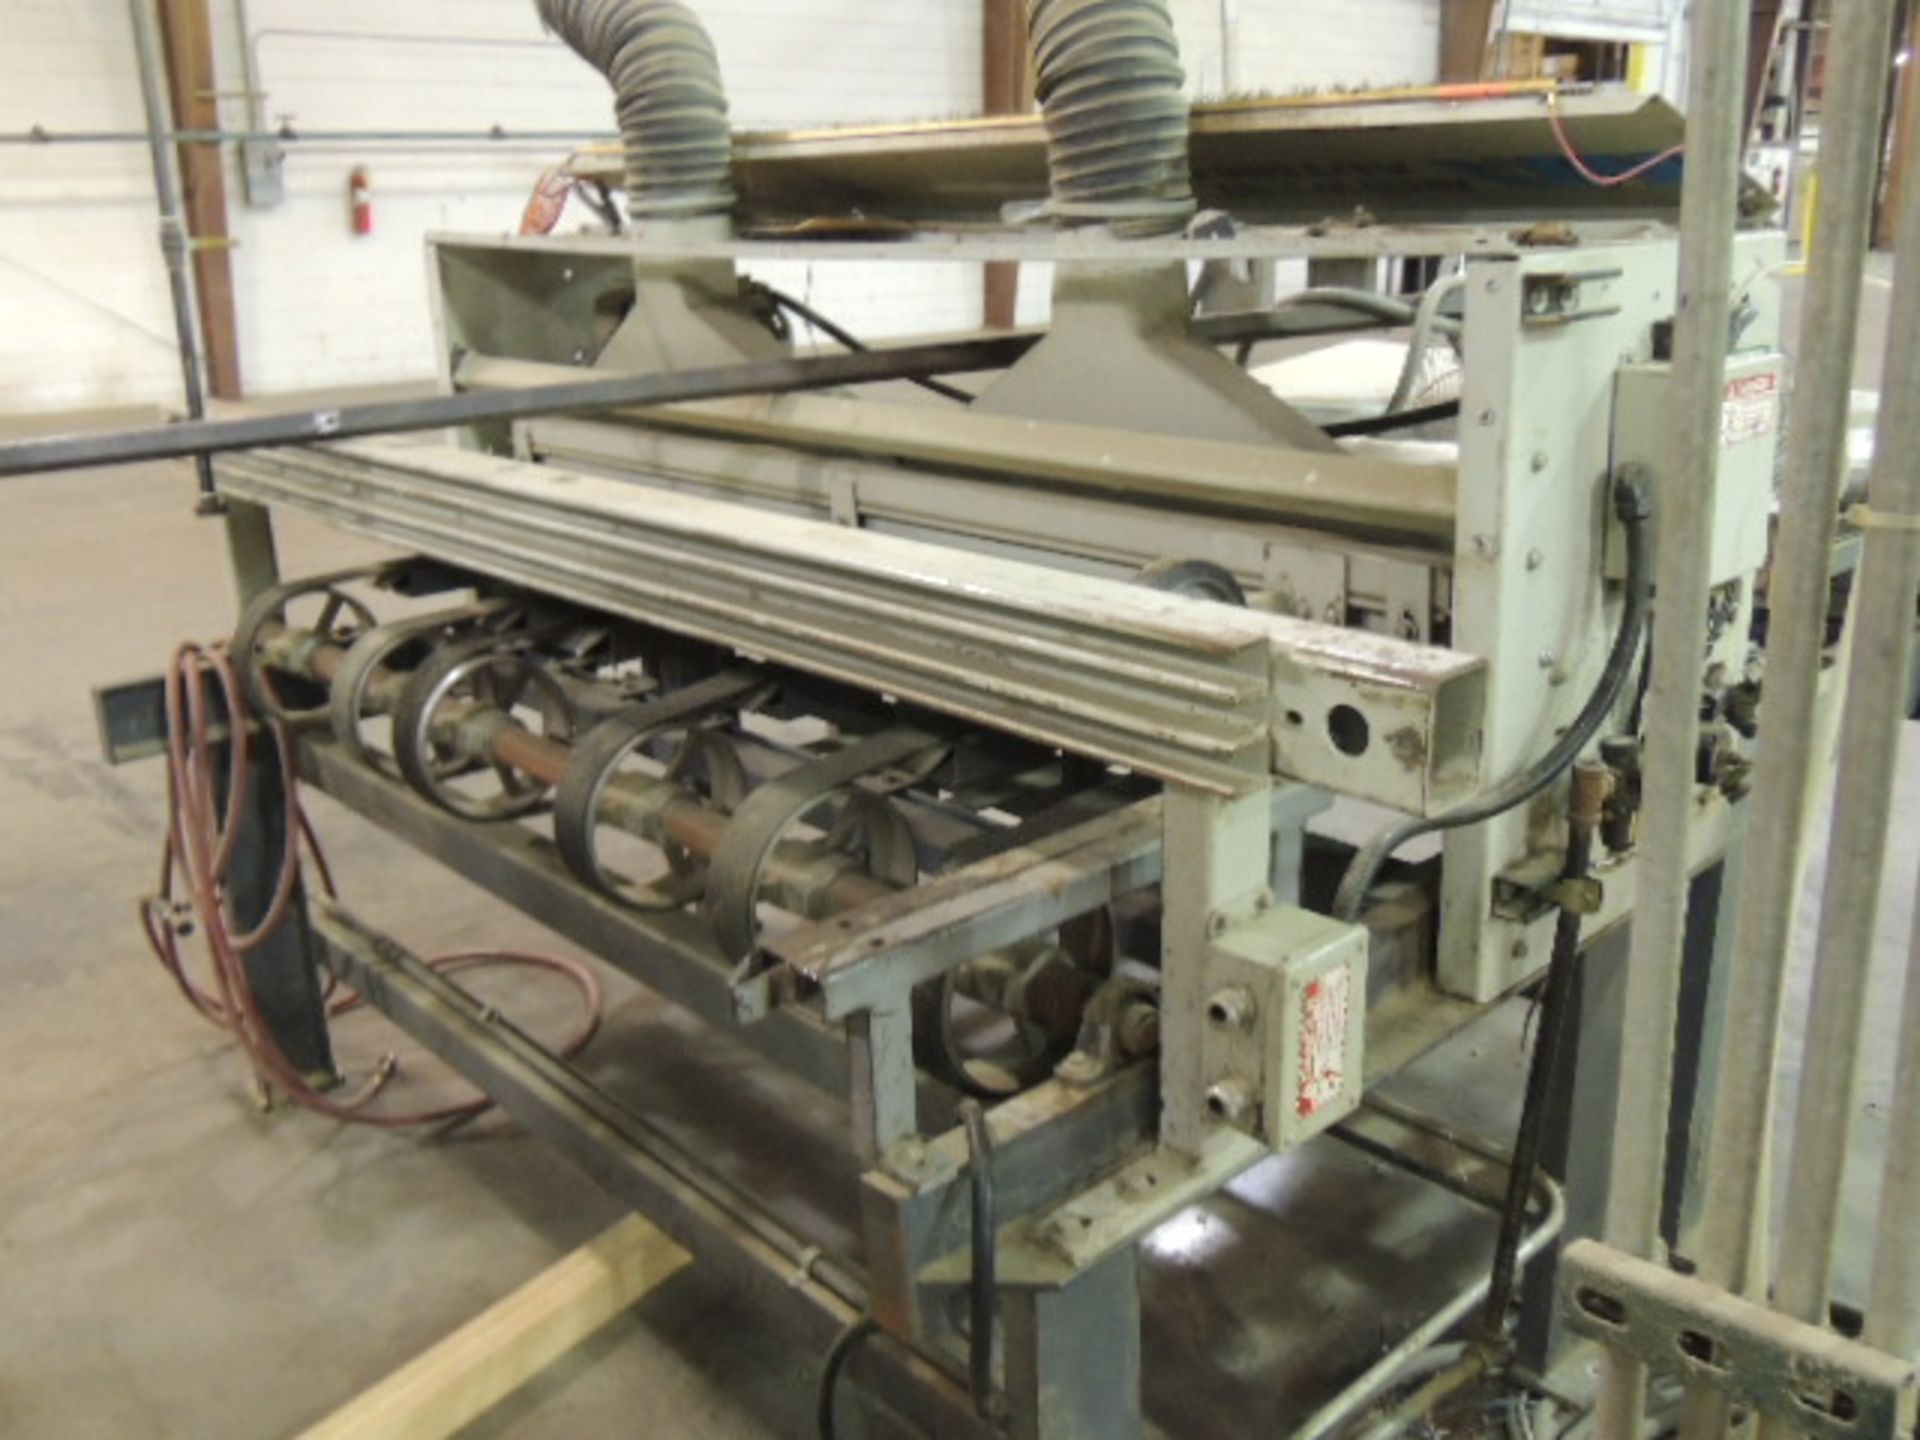 Midwest Automation SS 2050 Brush Cleaner, 60" capacity, 3phase, 460v. HIT# 2158077. Production Area.